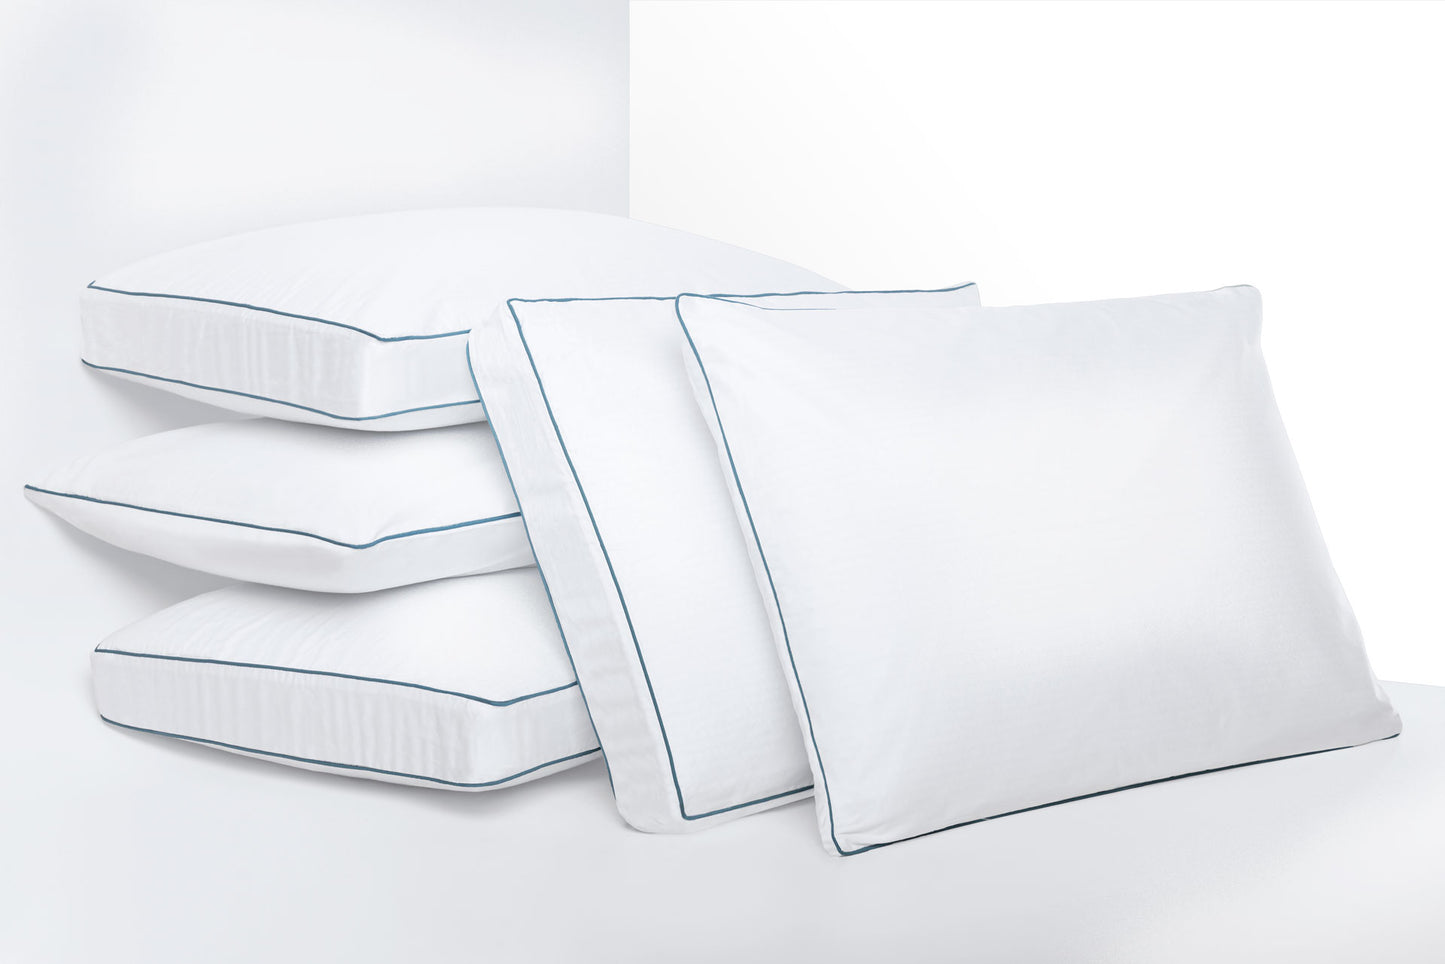 Photo of the 5 agility cool memory foam pillows, 3 stacked on top of each other and two leaning against the stacked pillows